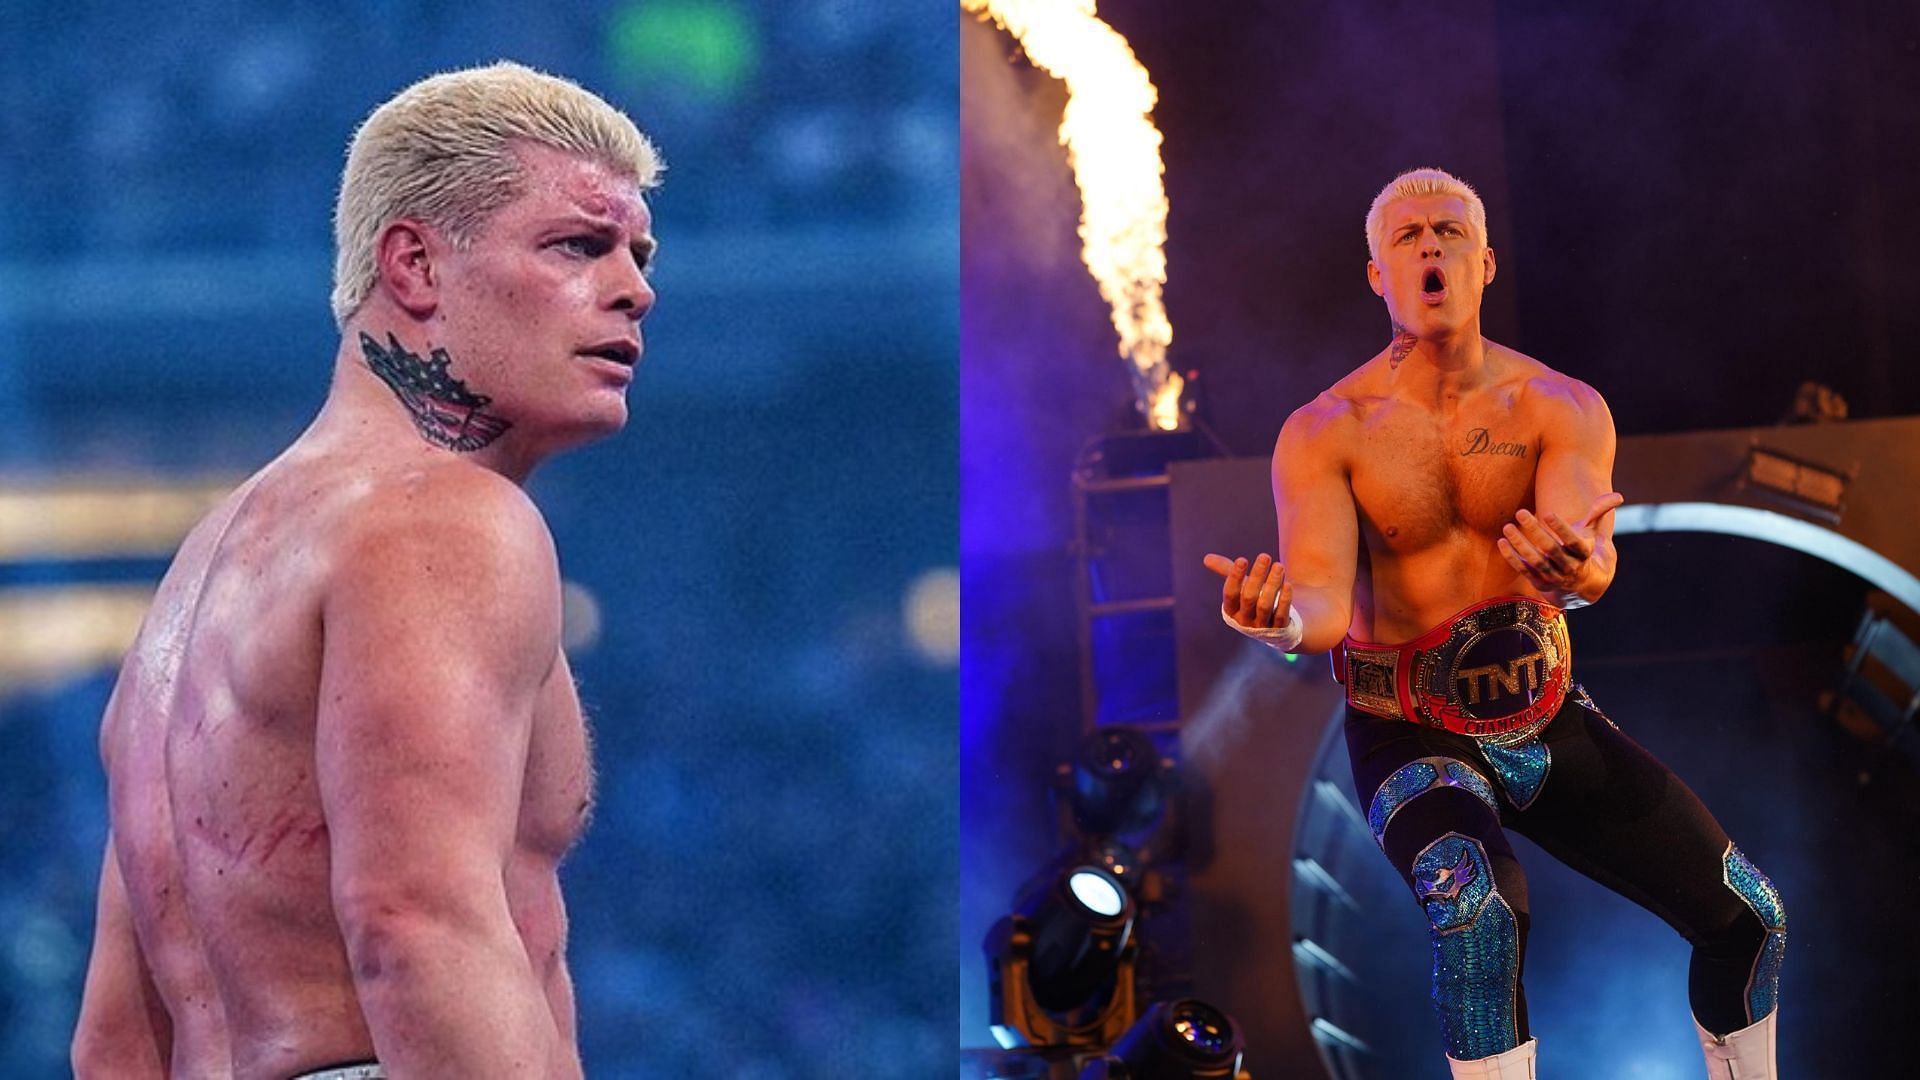 Cody Rhodes competed against numerous top stars in AEW